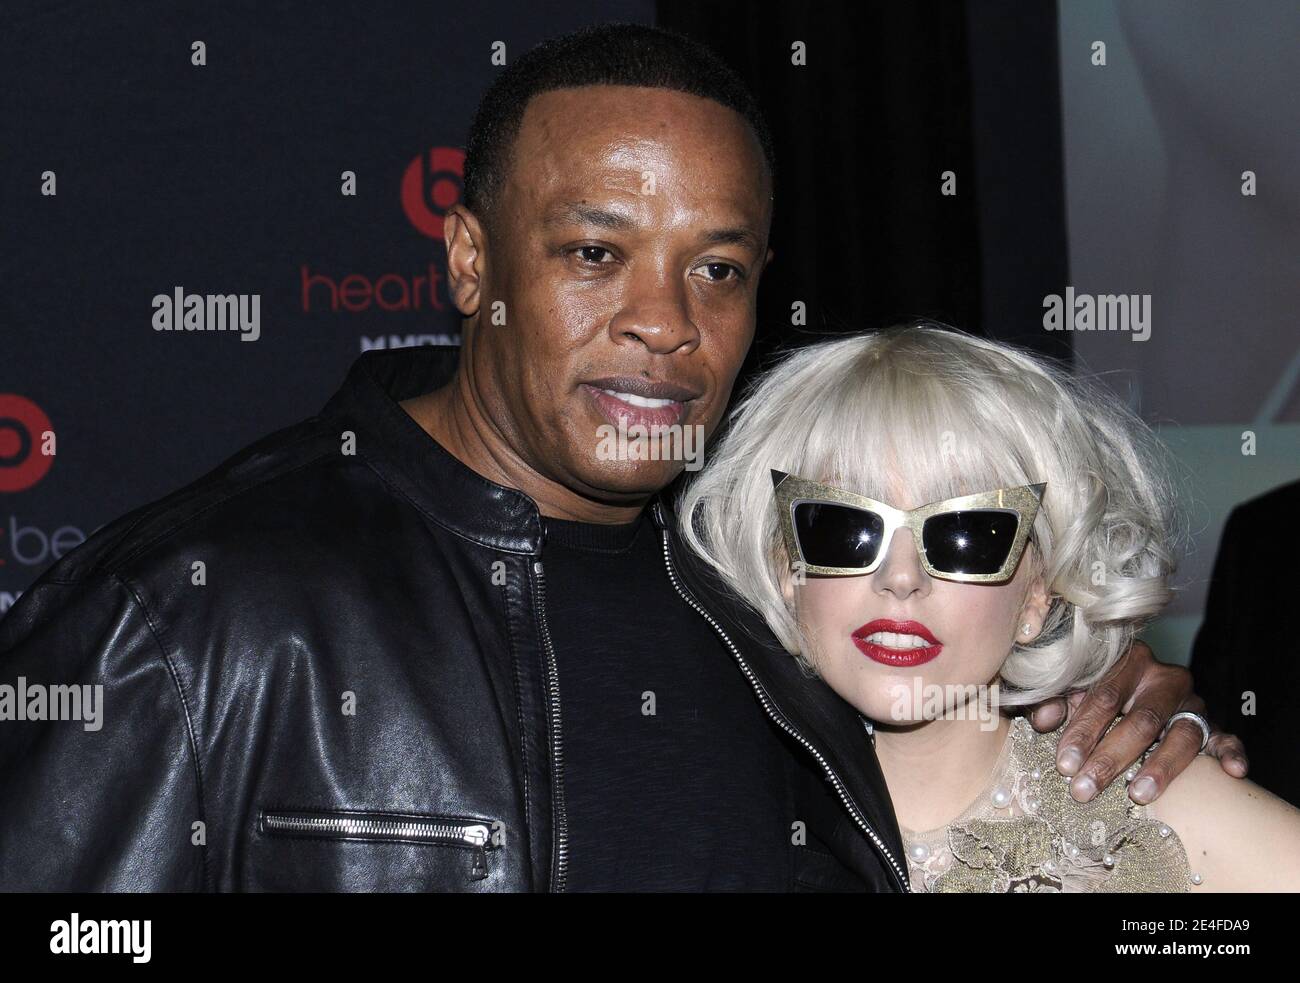 Singer Lady Gaga attends the launch of Monster and Beats by Dr. Dre's first artist line 'Heartbeats by Lady Gaga' in New York City, NY, USA on September 30, 2009. Photo by Fernando Leon/ABACAPRESS.COM Stock Photo